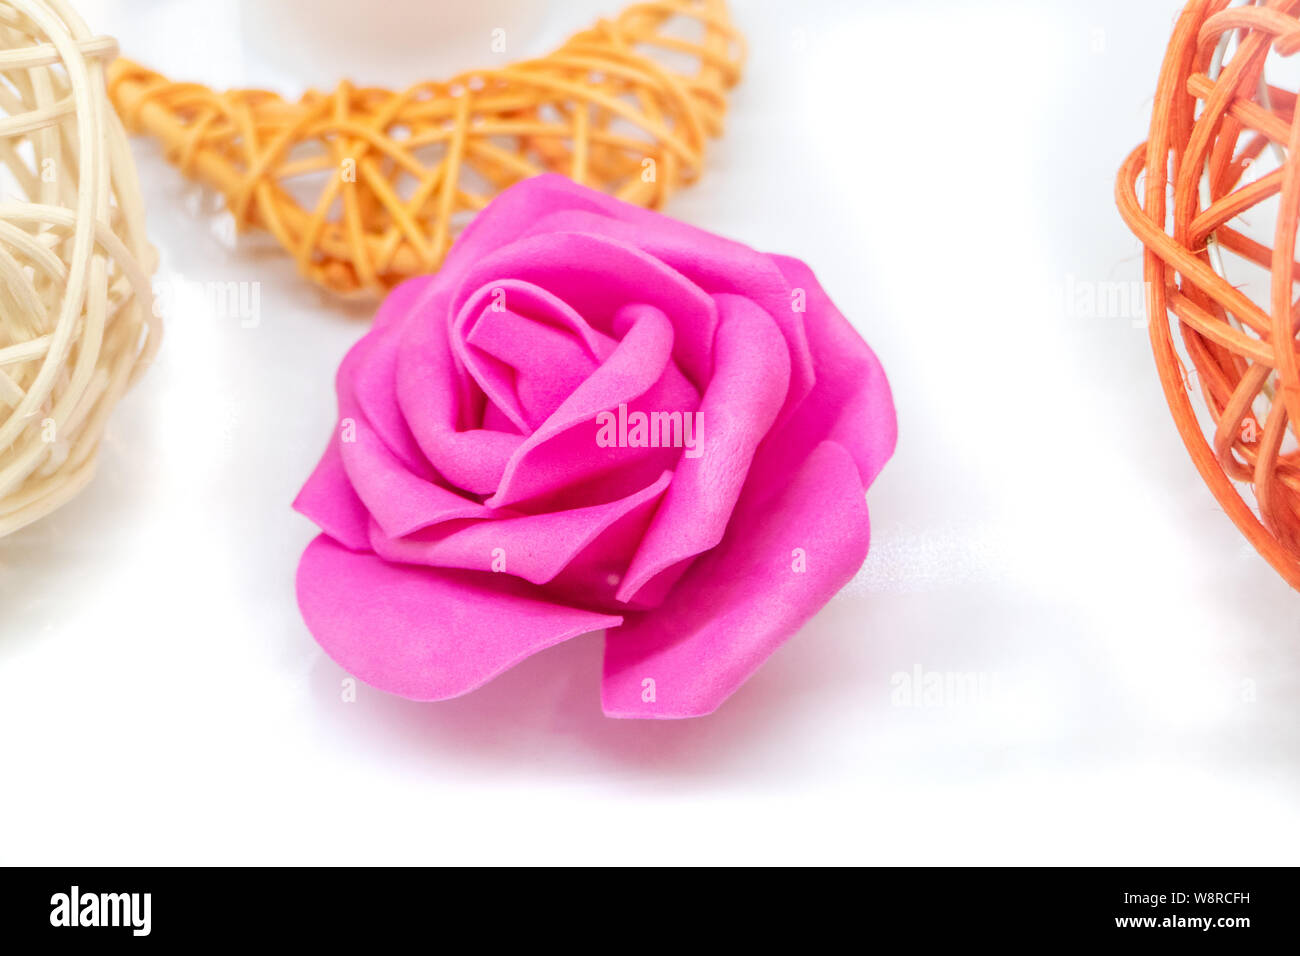 Rattan ball and material flower on white Stock Photo